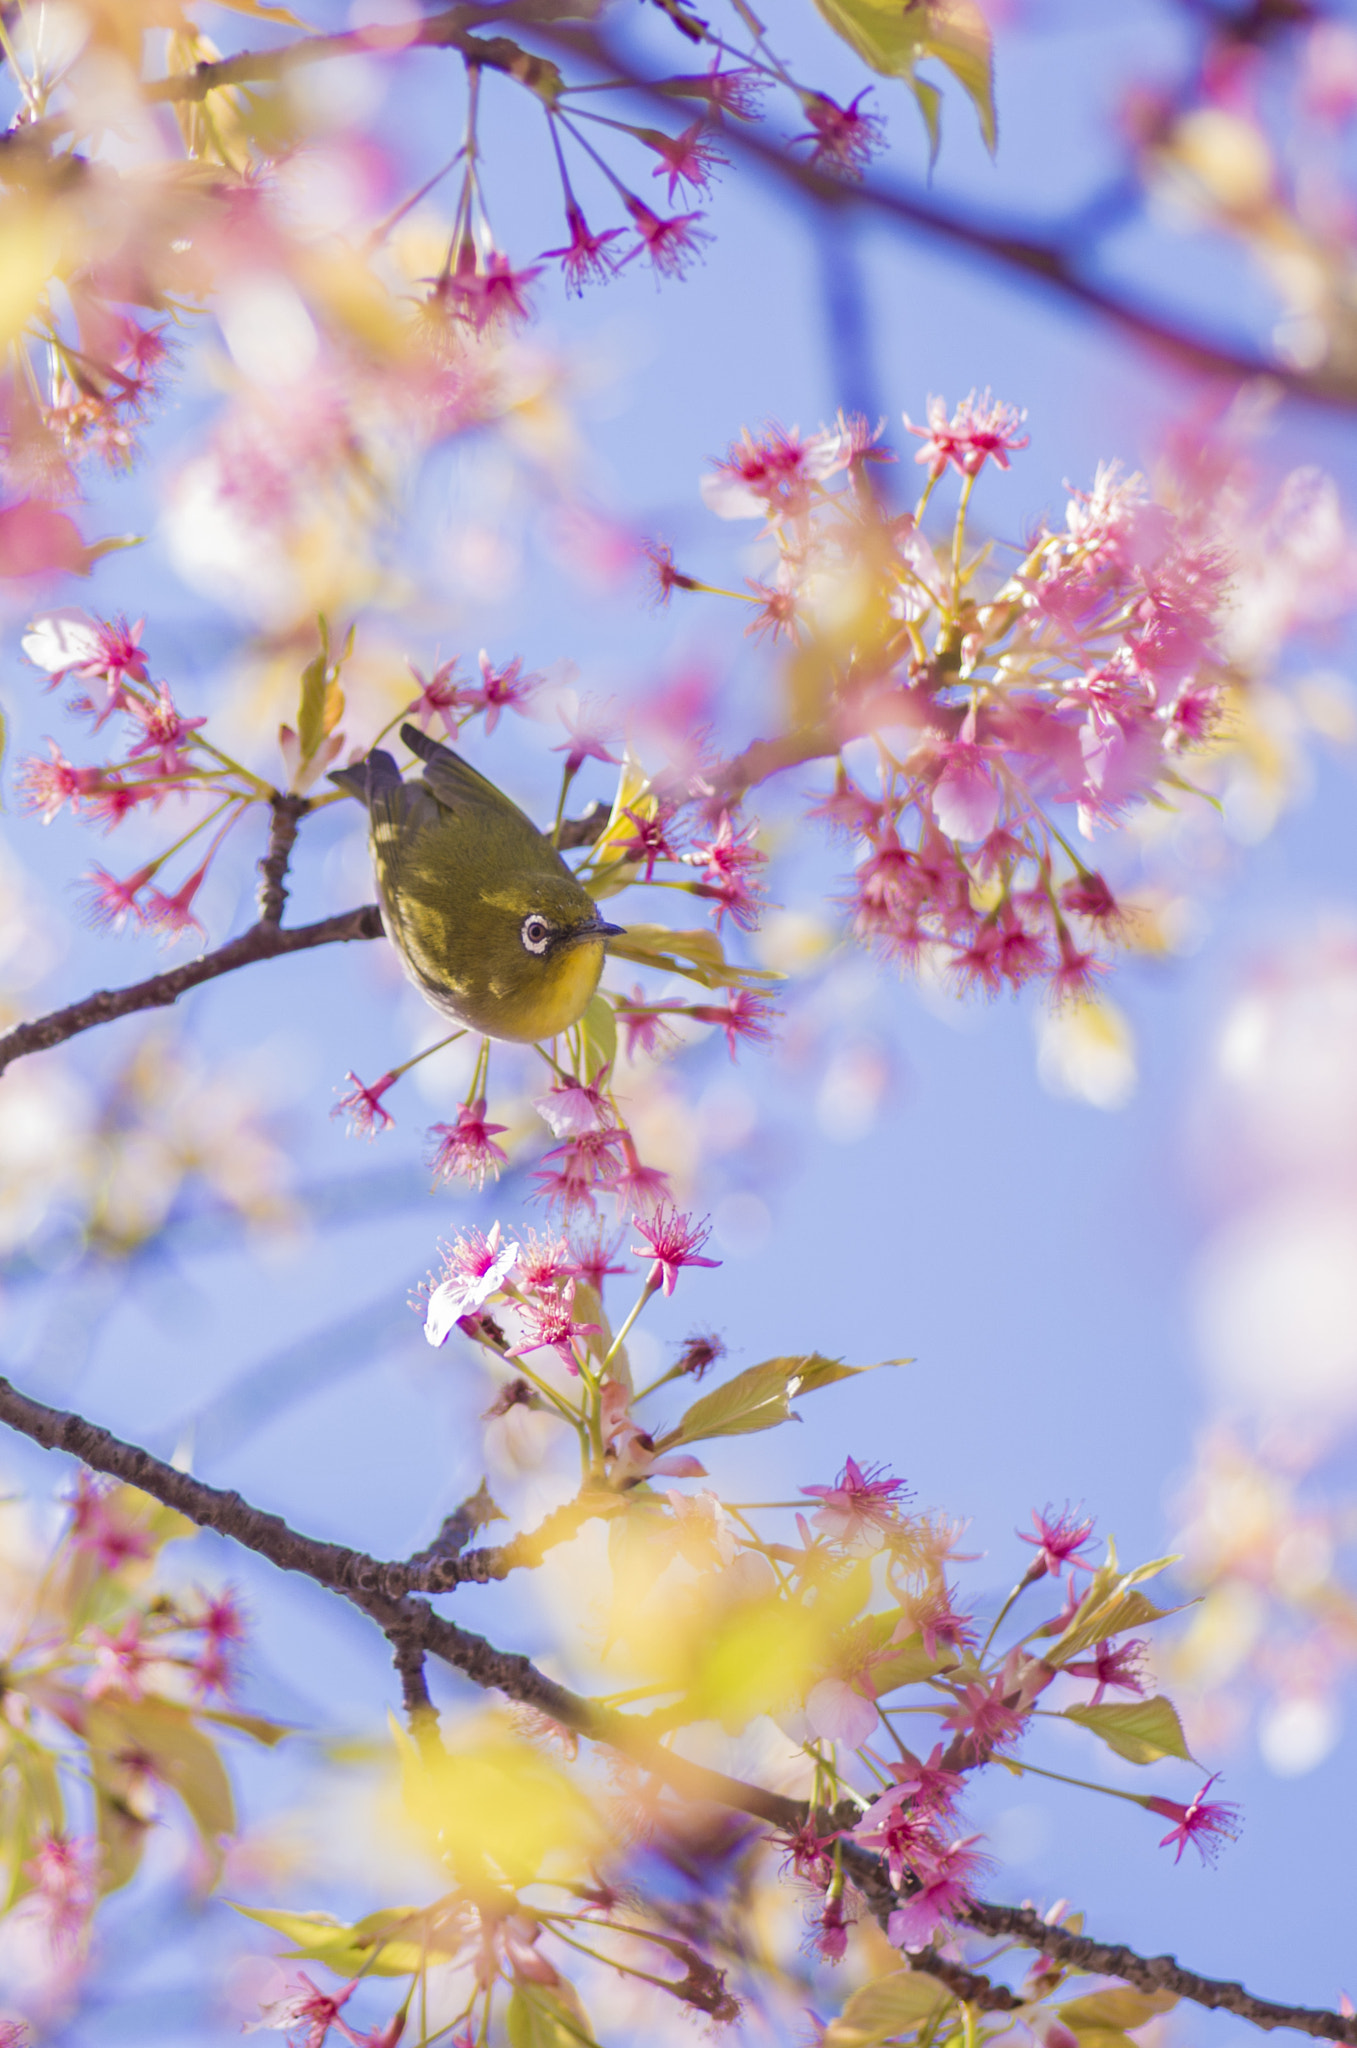 Pentax K-5 II sample photo. Bird and blossoms photography